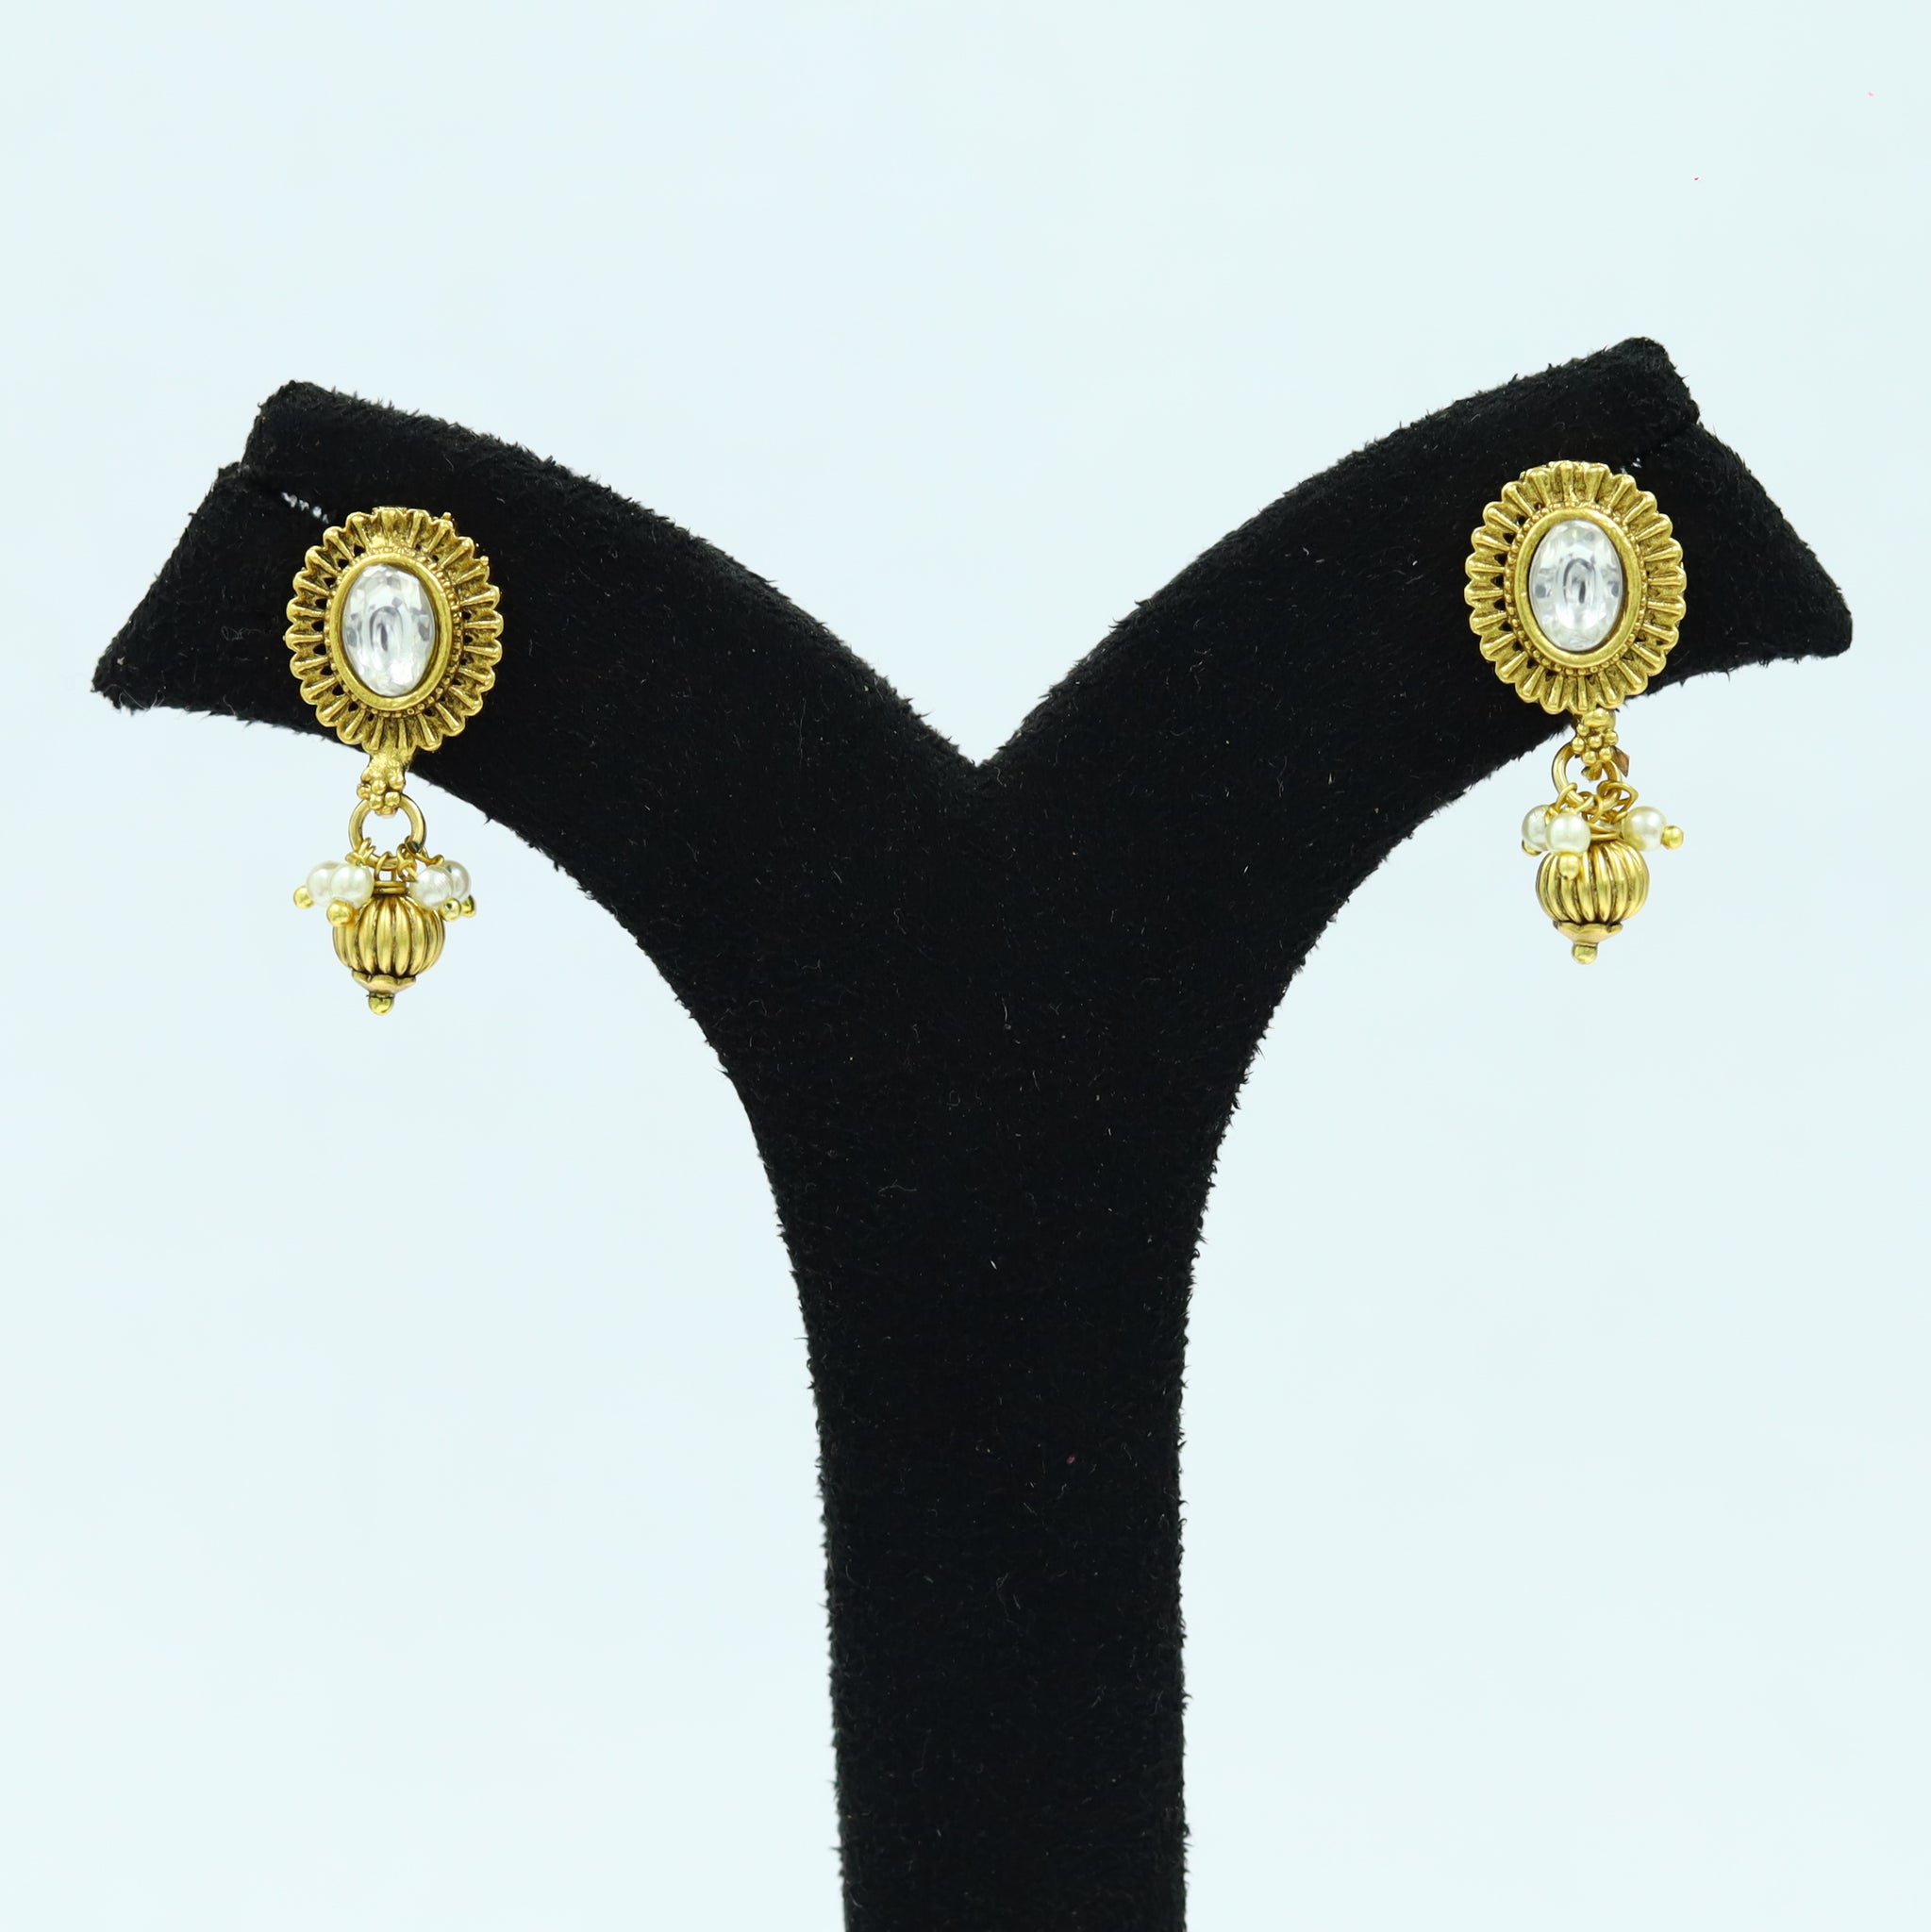 Tops/Studs Antique Earring 12363-28